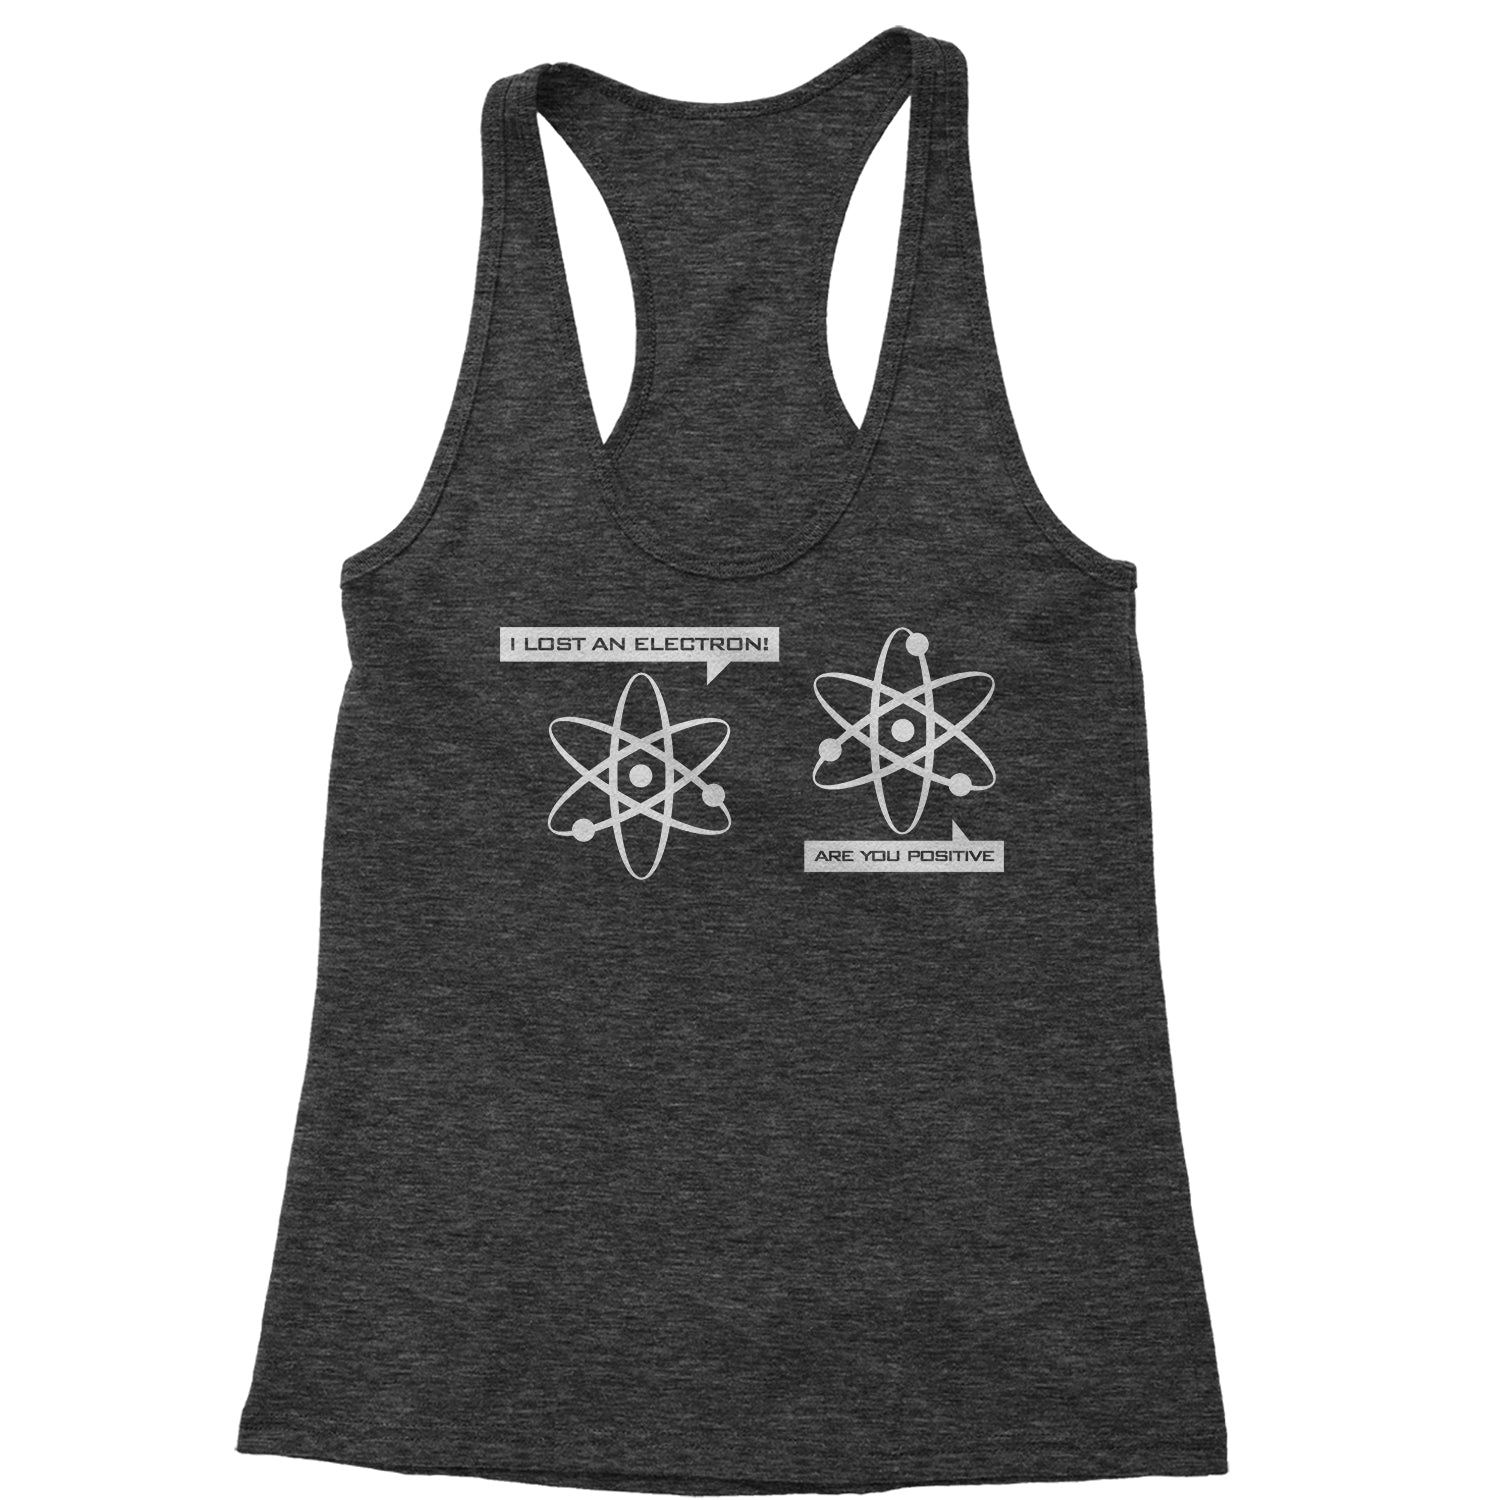 I Lost An Electron Funny Physics Racerback Tank Top for Women an, are, chemistry, clothing, electron, funny, I, lost, physics, positive, this, thiswear, wear, you by Expression Tees